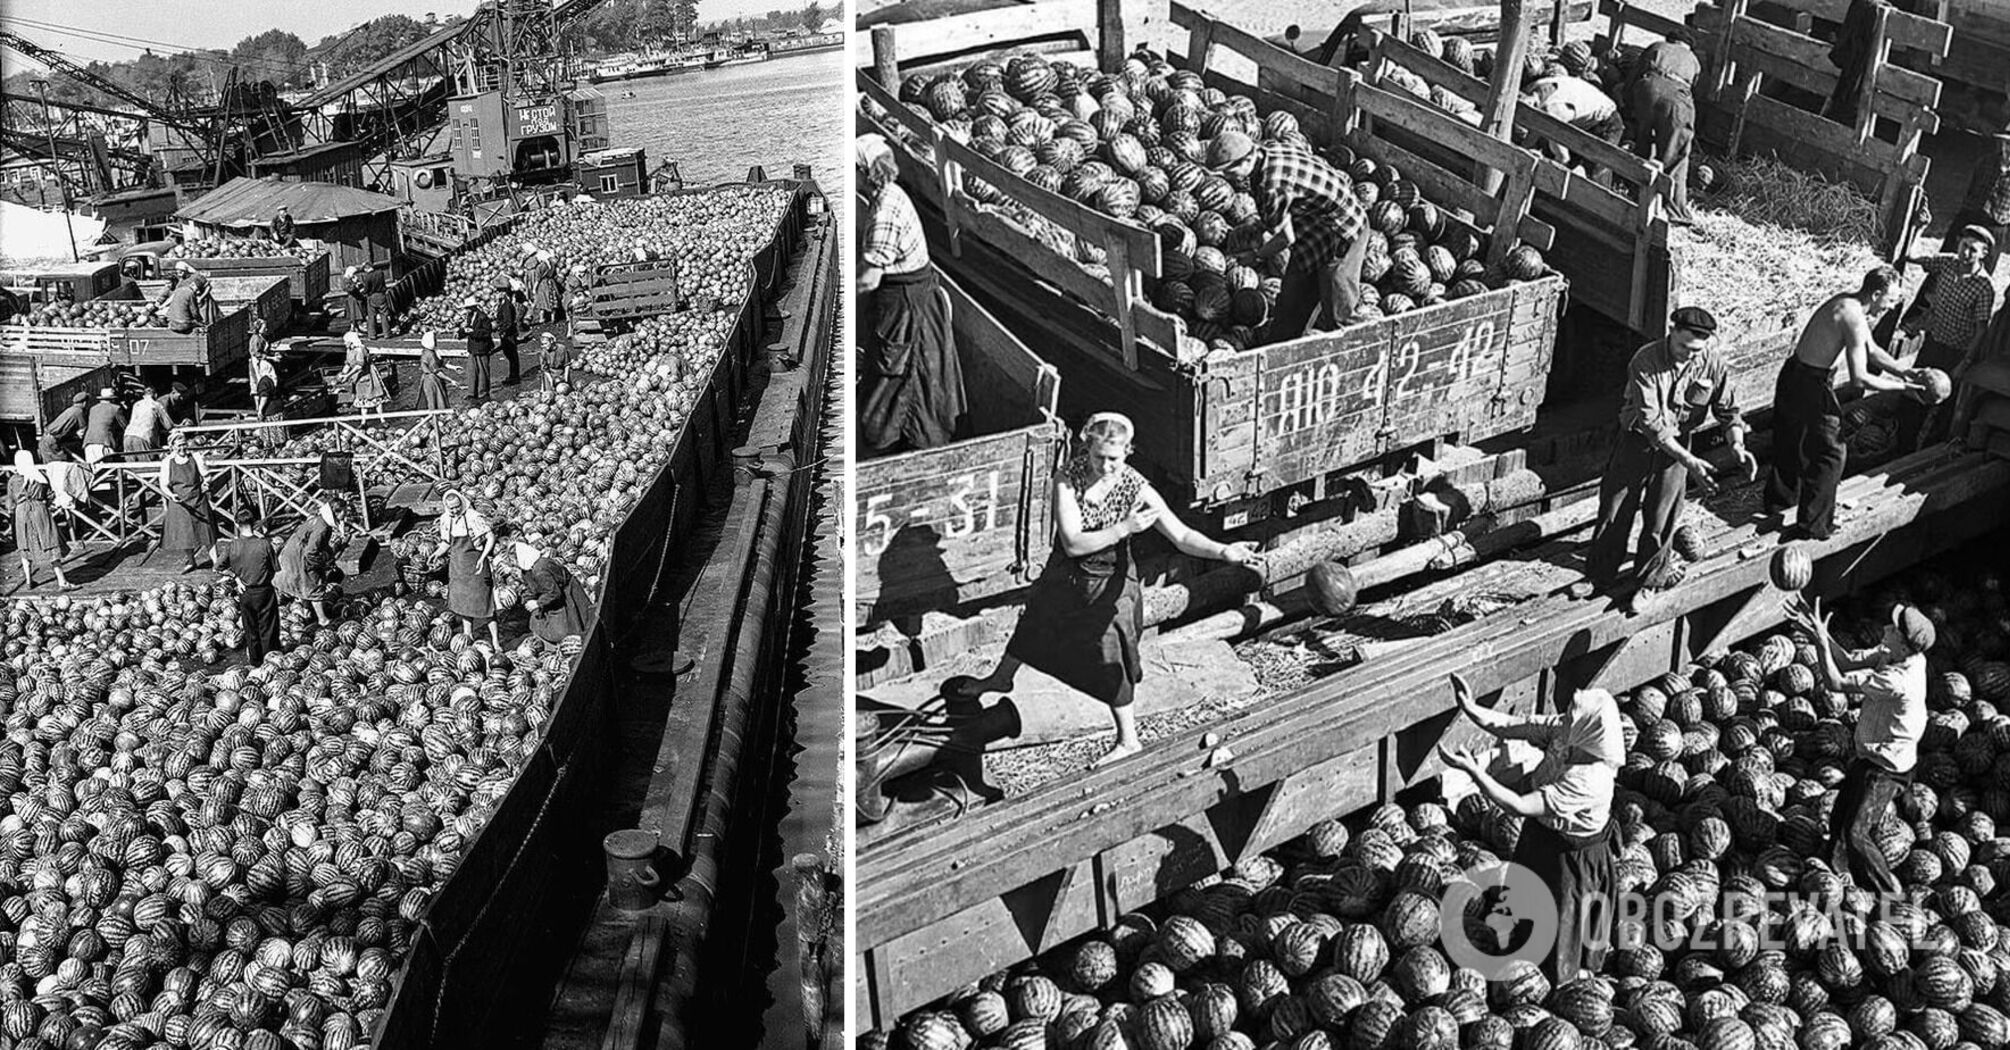 Unloading barges with watermelons at the Kyiv pier.